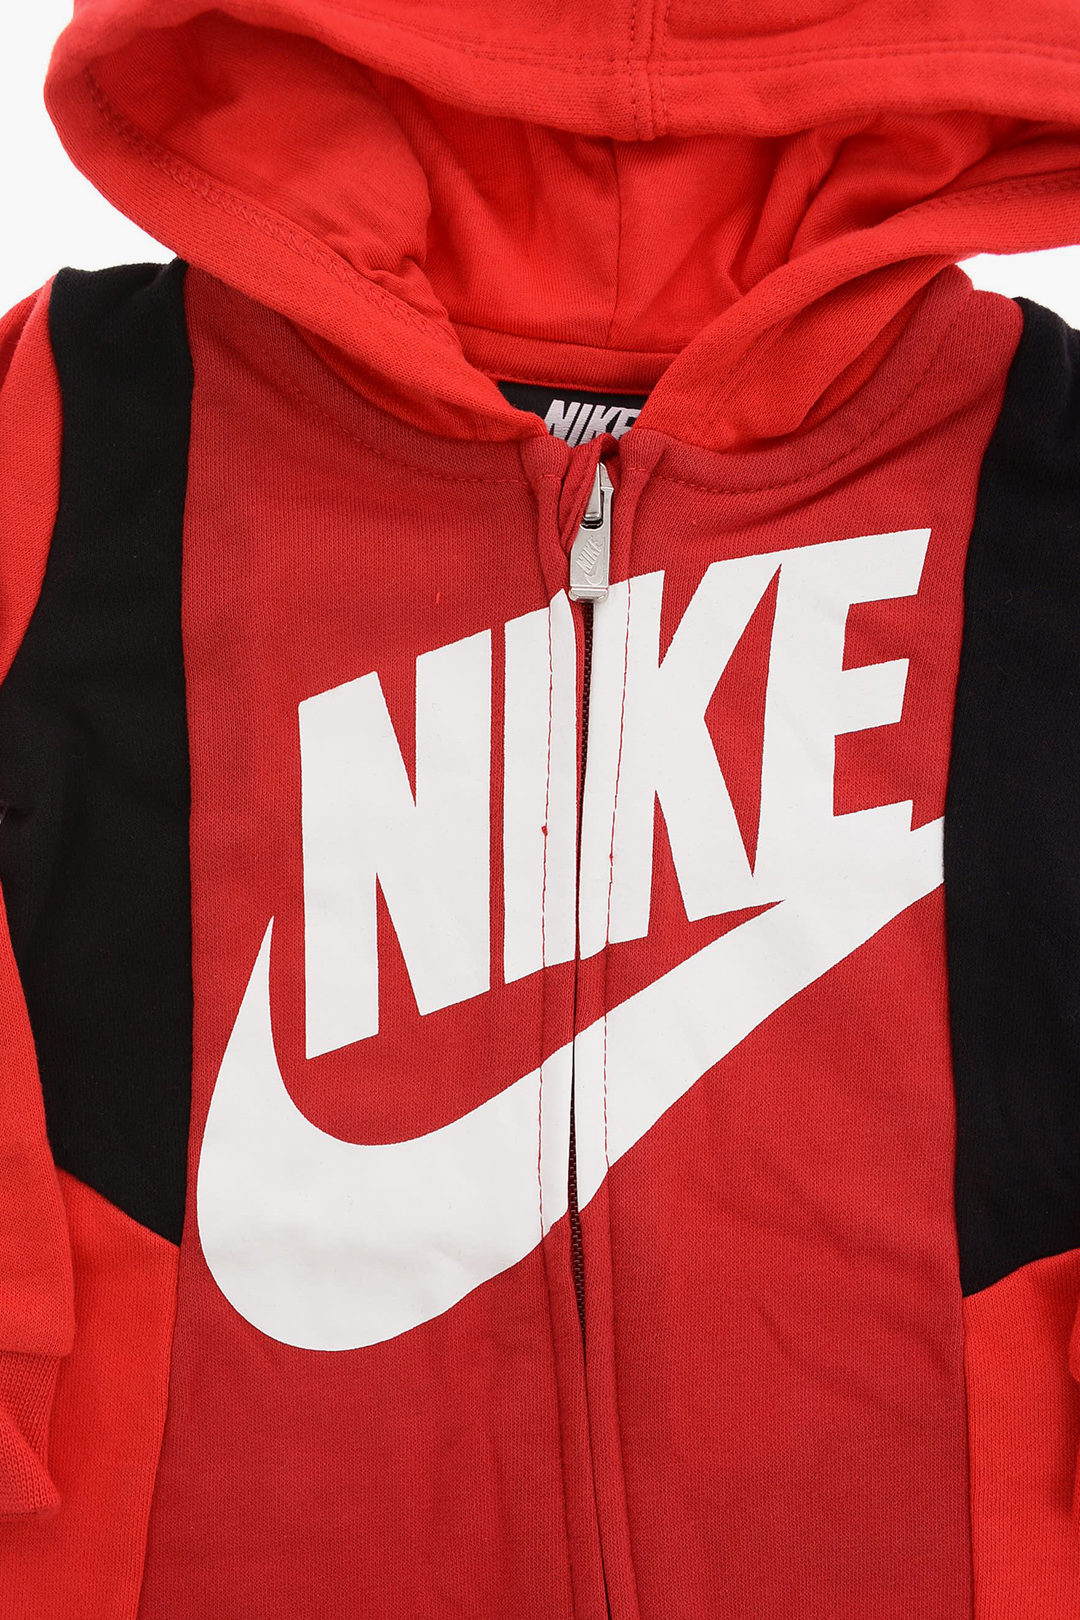 nike suit for boys